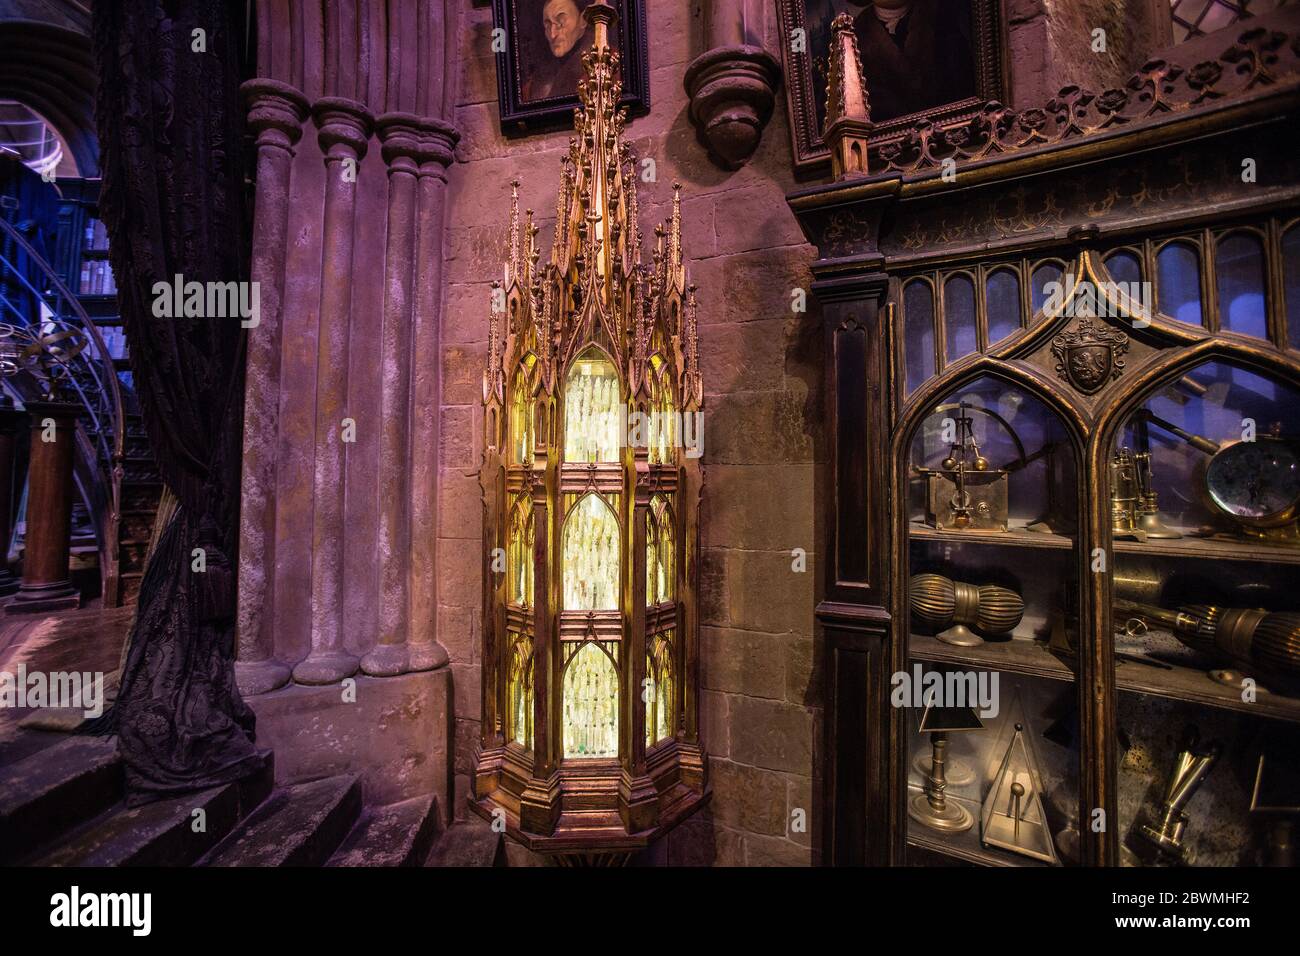 Architecture Of Dumbledore's Office!!!